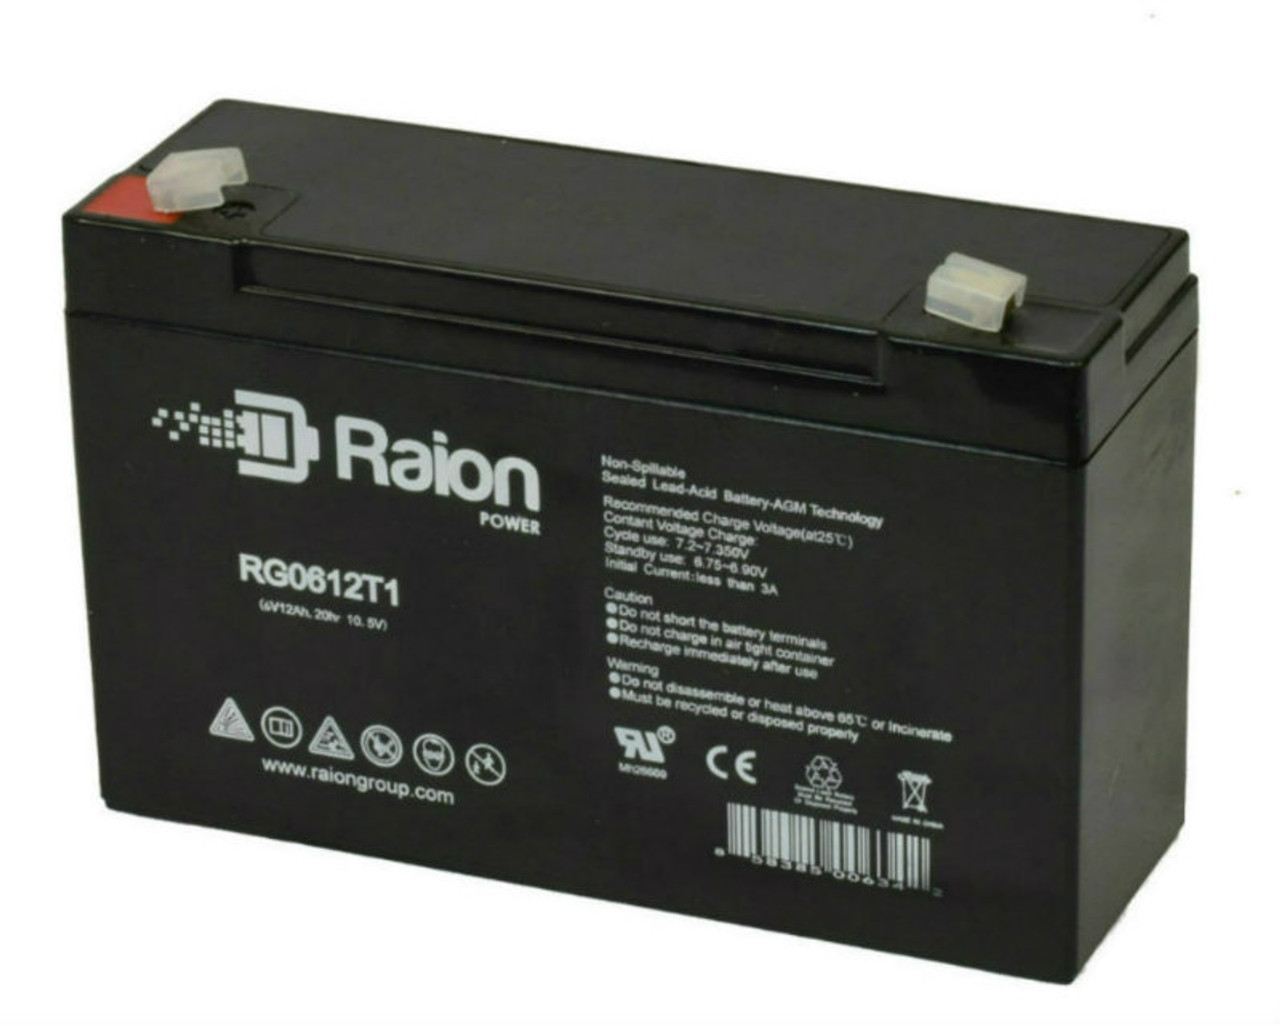 Raion Power RG06120T1 Replacement Battery for Yucel Y10-6